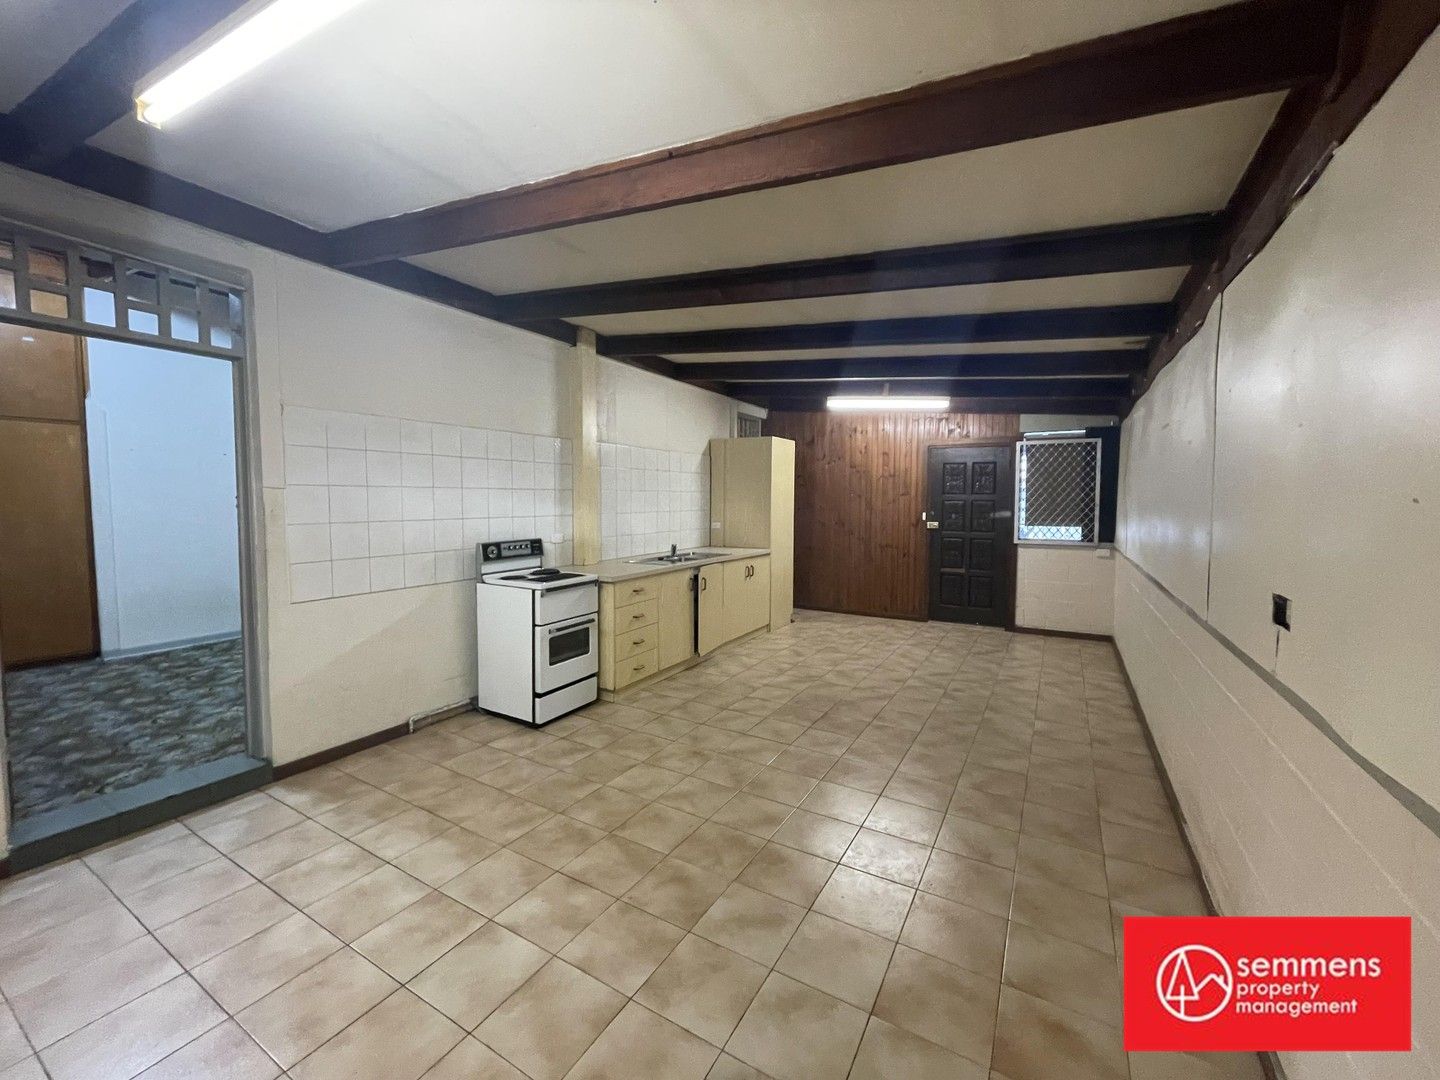 1 bedrooms Apartment / Unit / Flat in 1/23 Liberty Grove WOODVILLE GARDENS SA, 5012